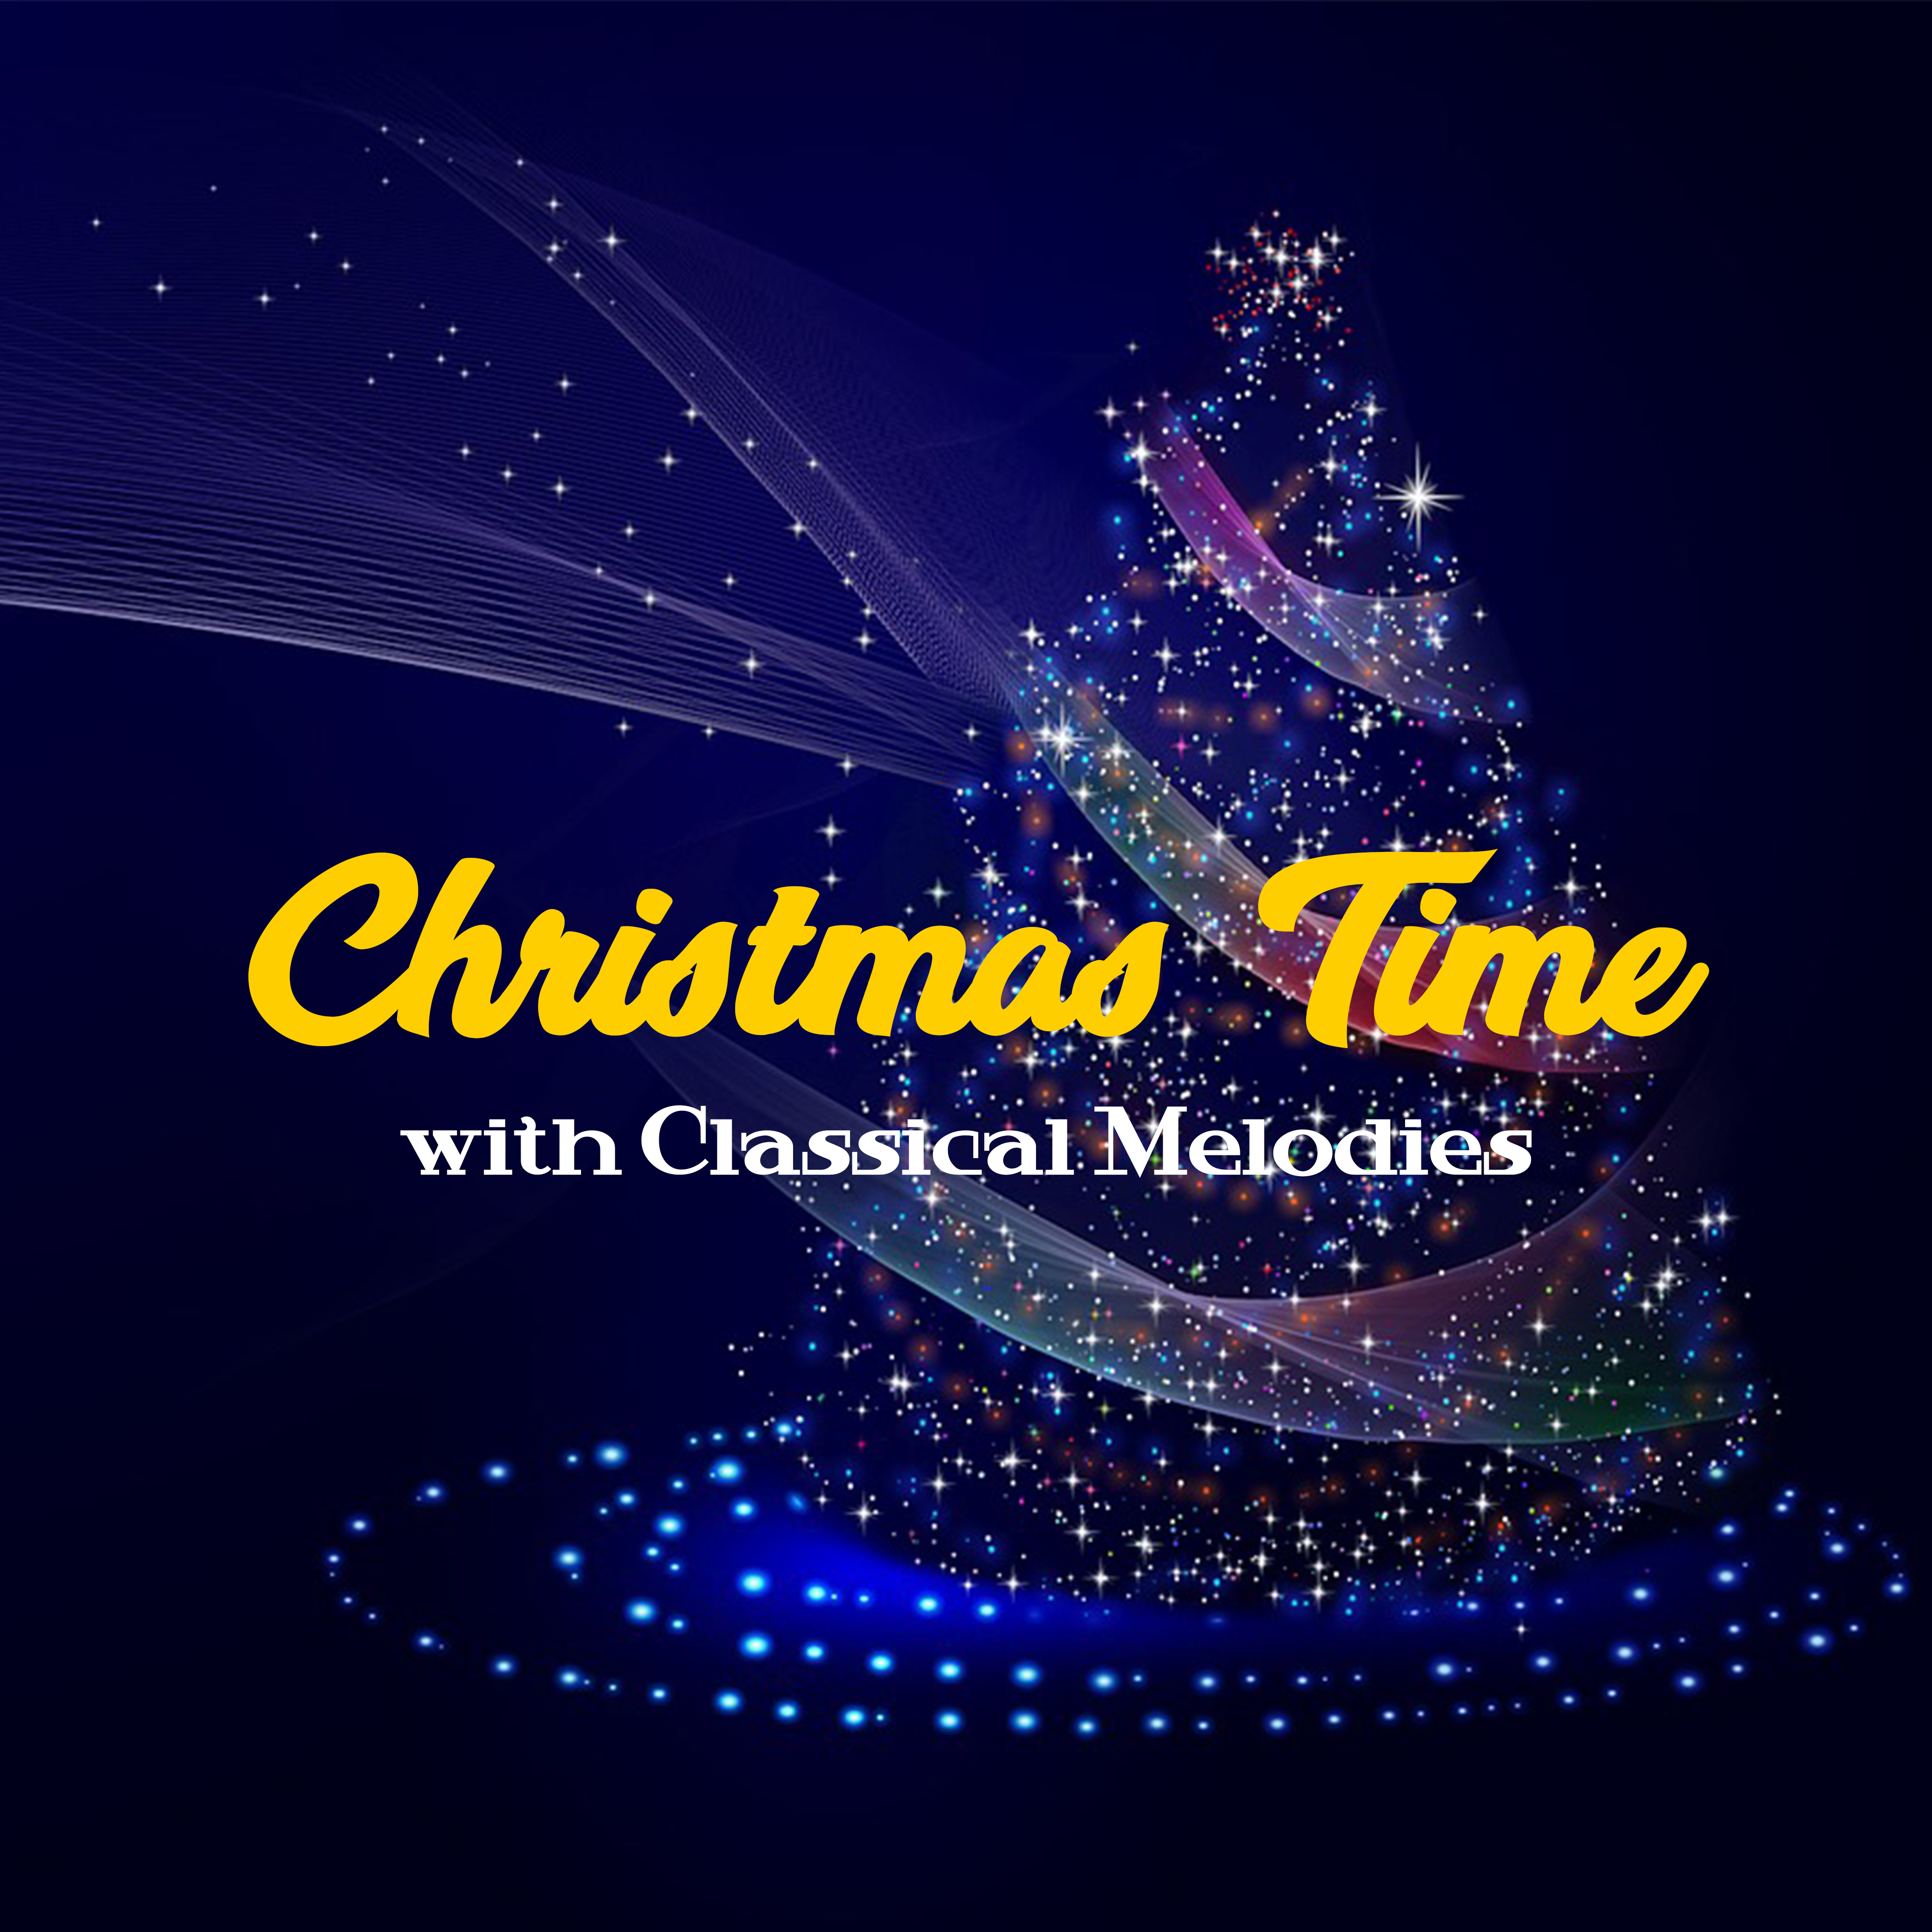 Christmas Time with Classical Melodies